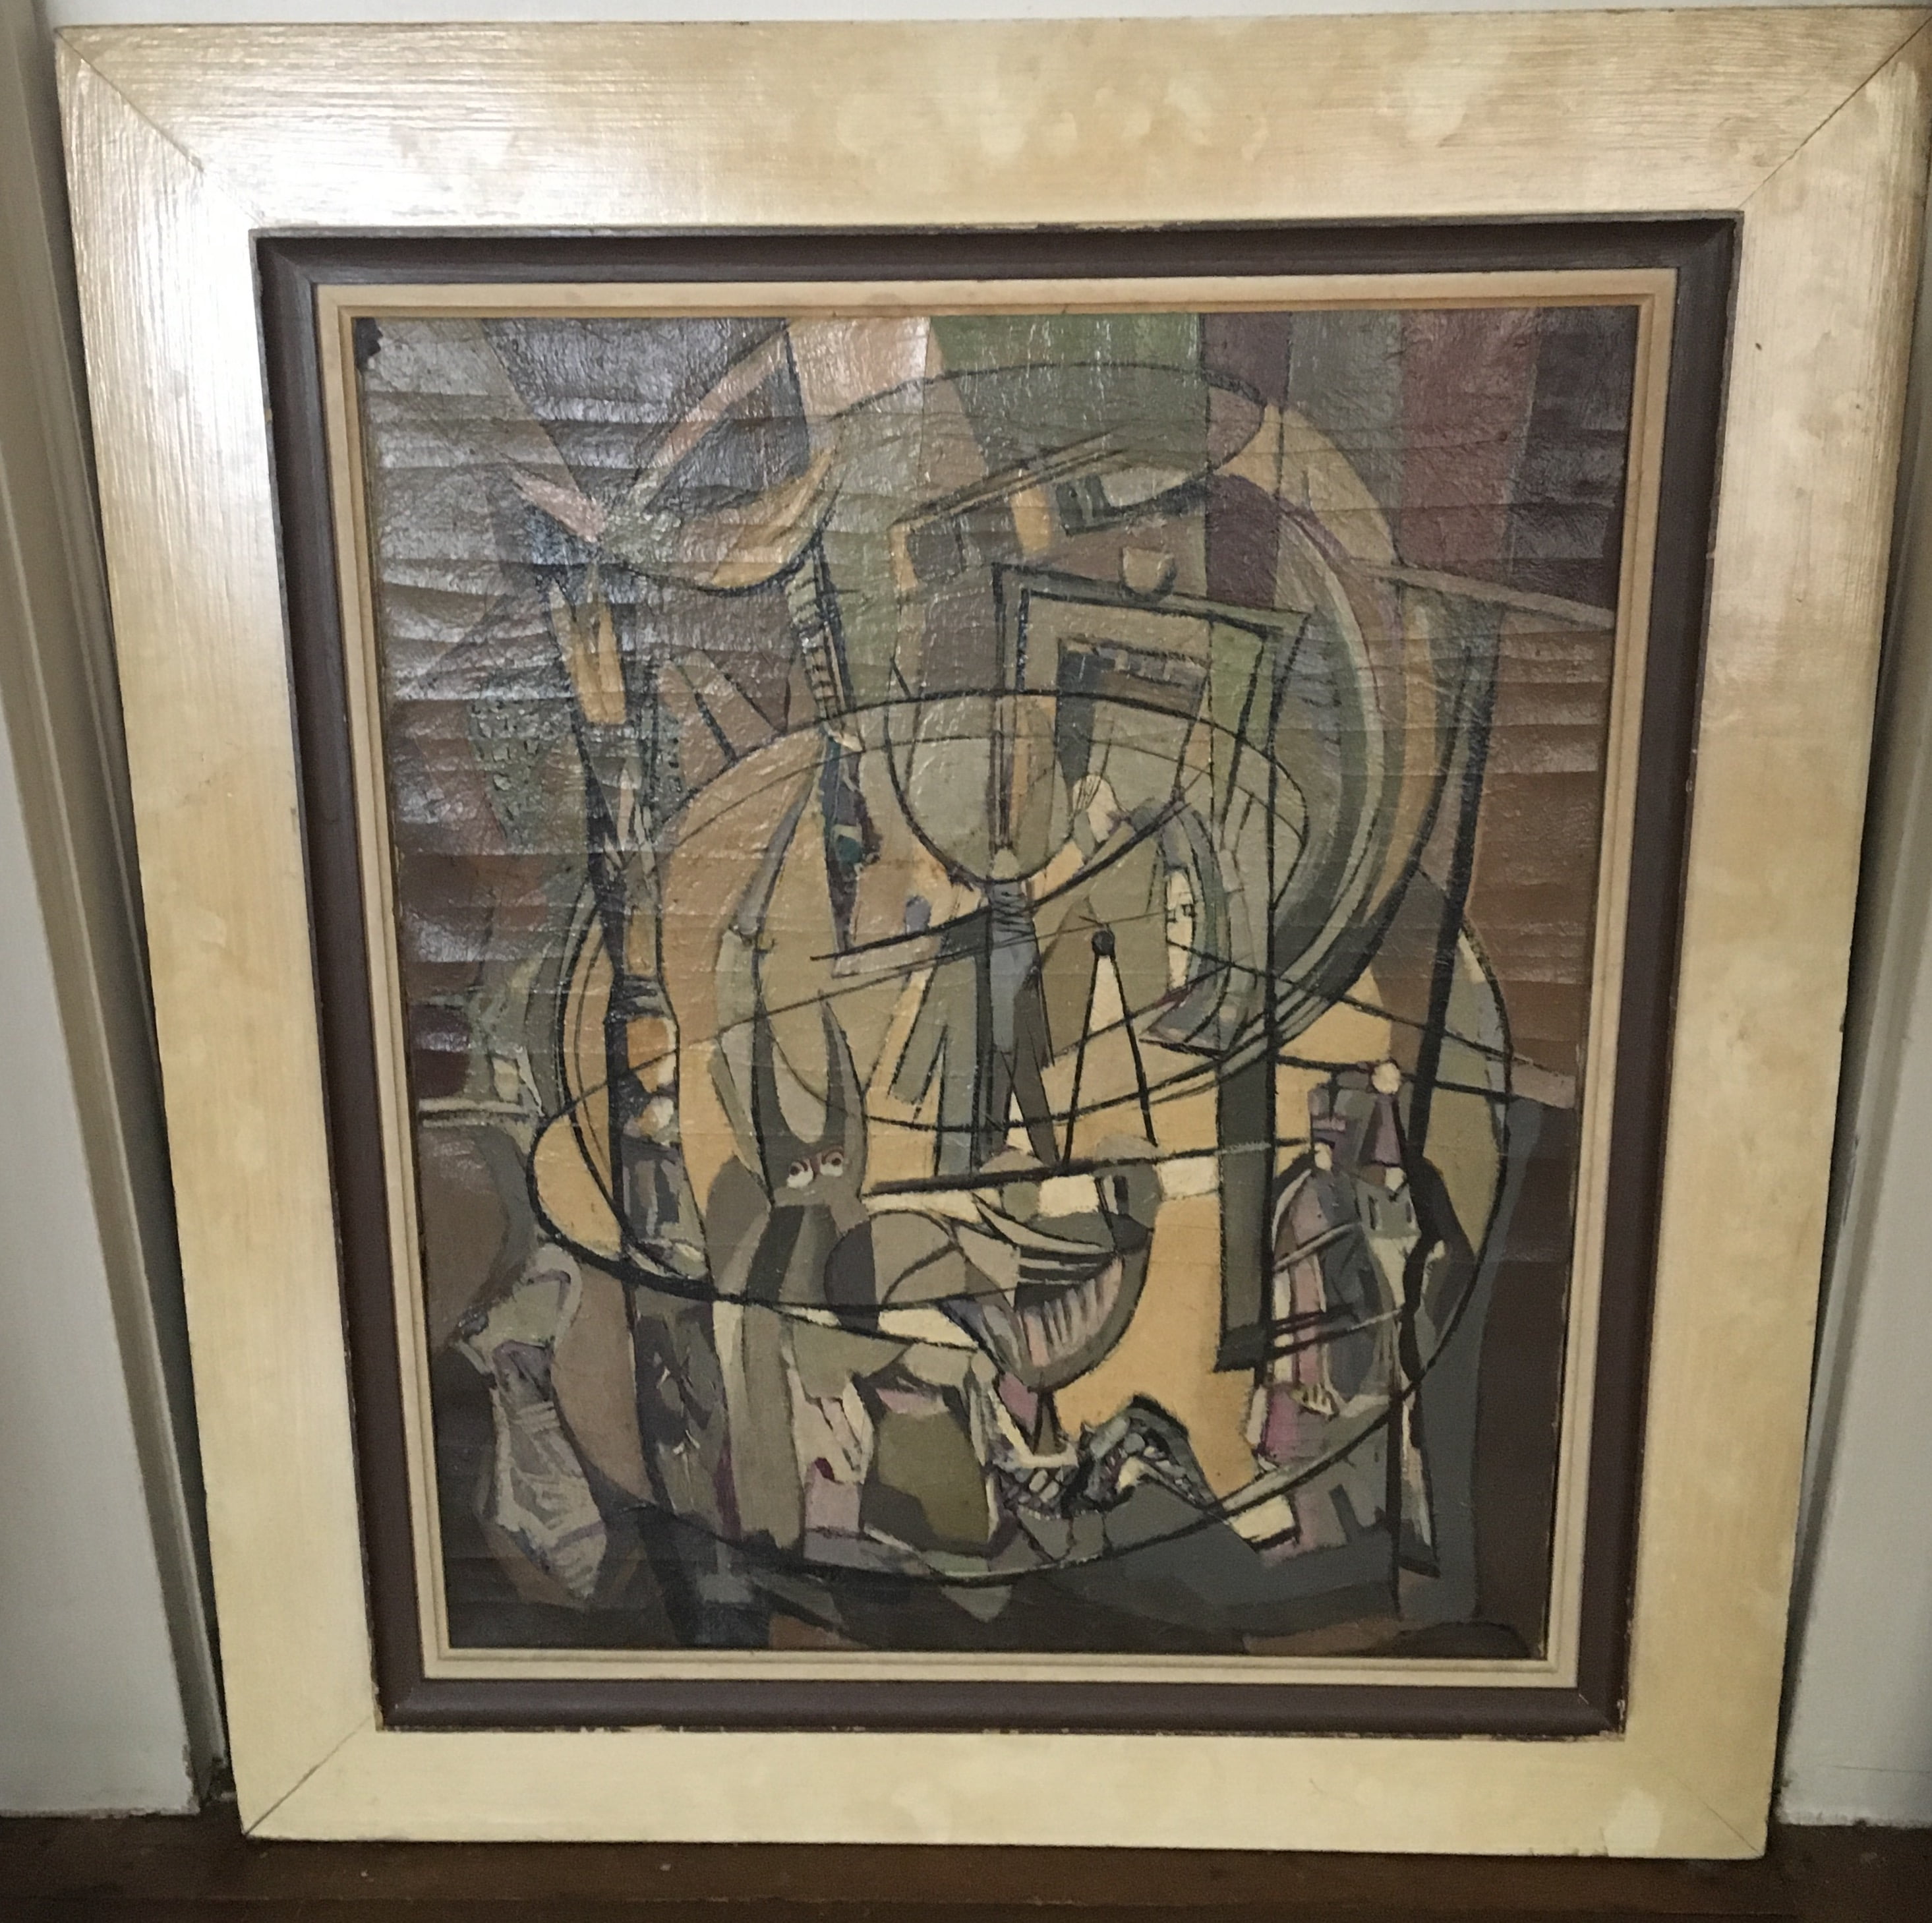 Eastern European modern abstract : <i>Center ring circus</i>, 1958.